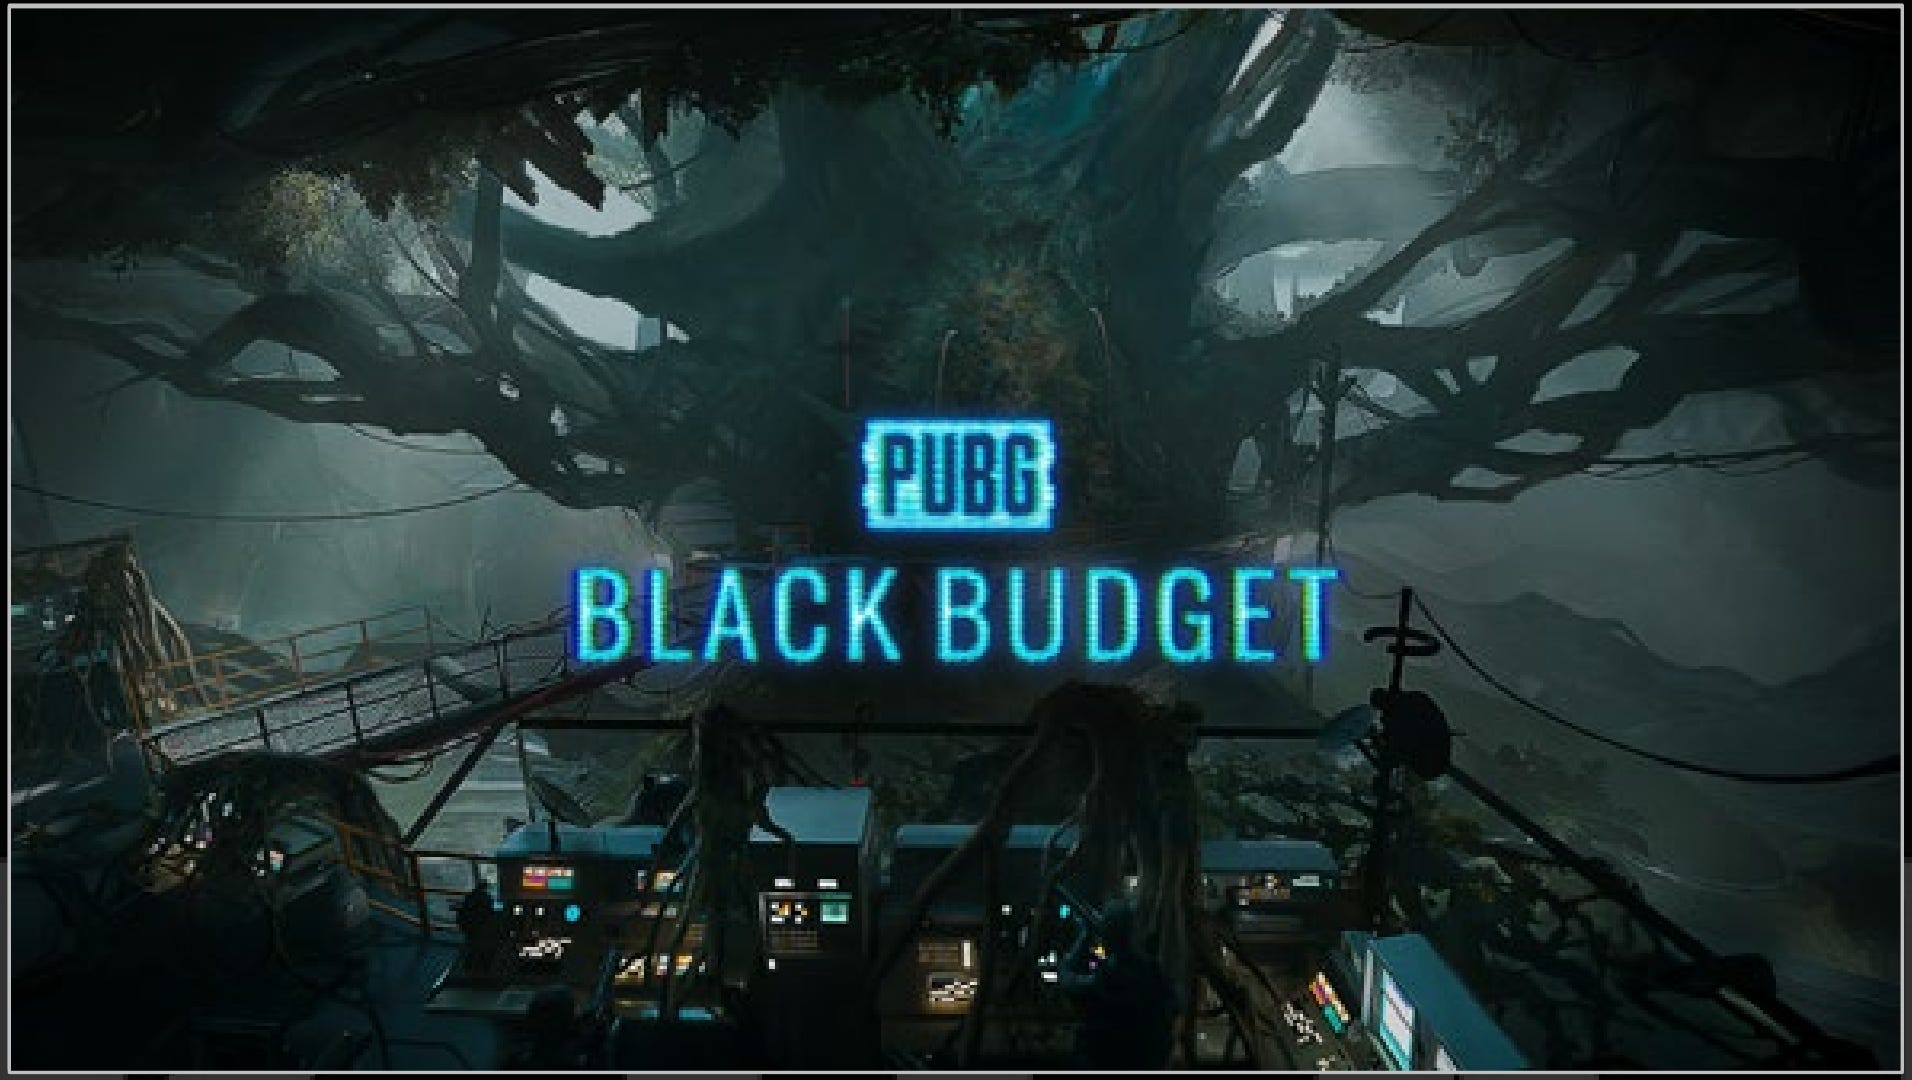 PUBG Studios' Project Black Budget will release sooner than expected, says publisher Krafton